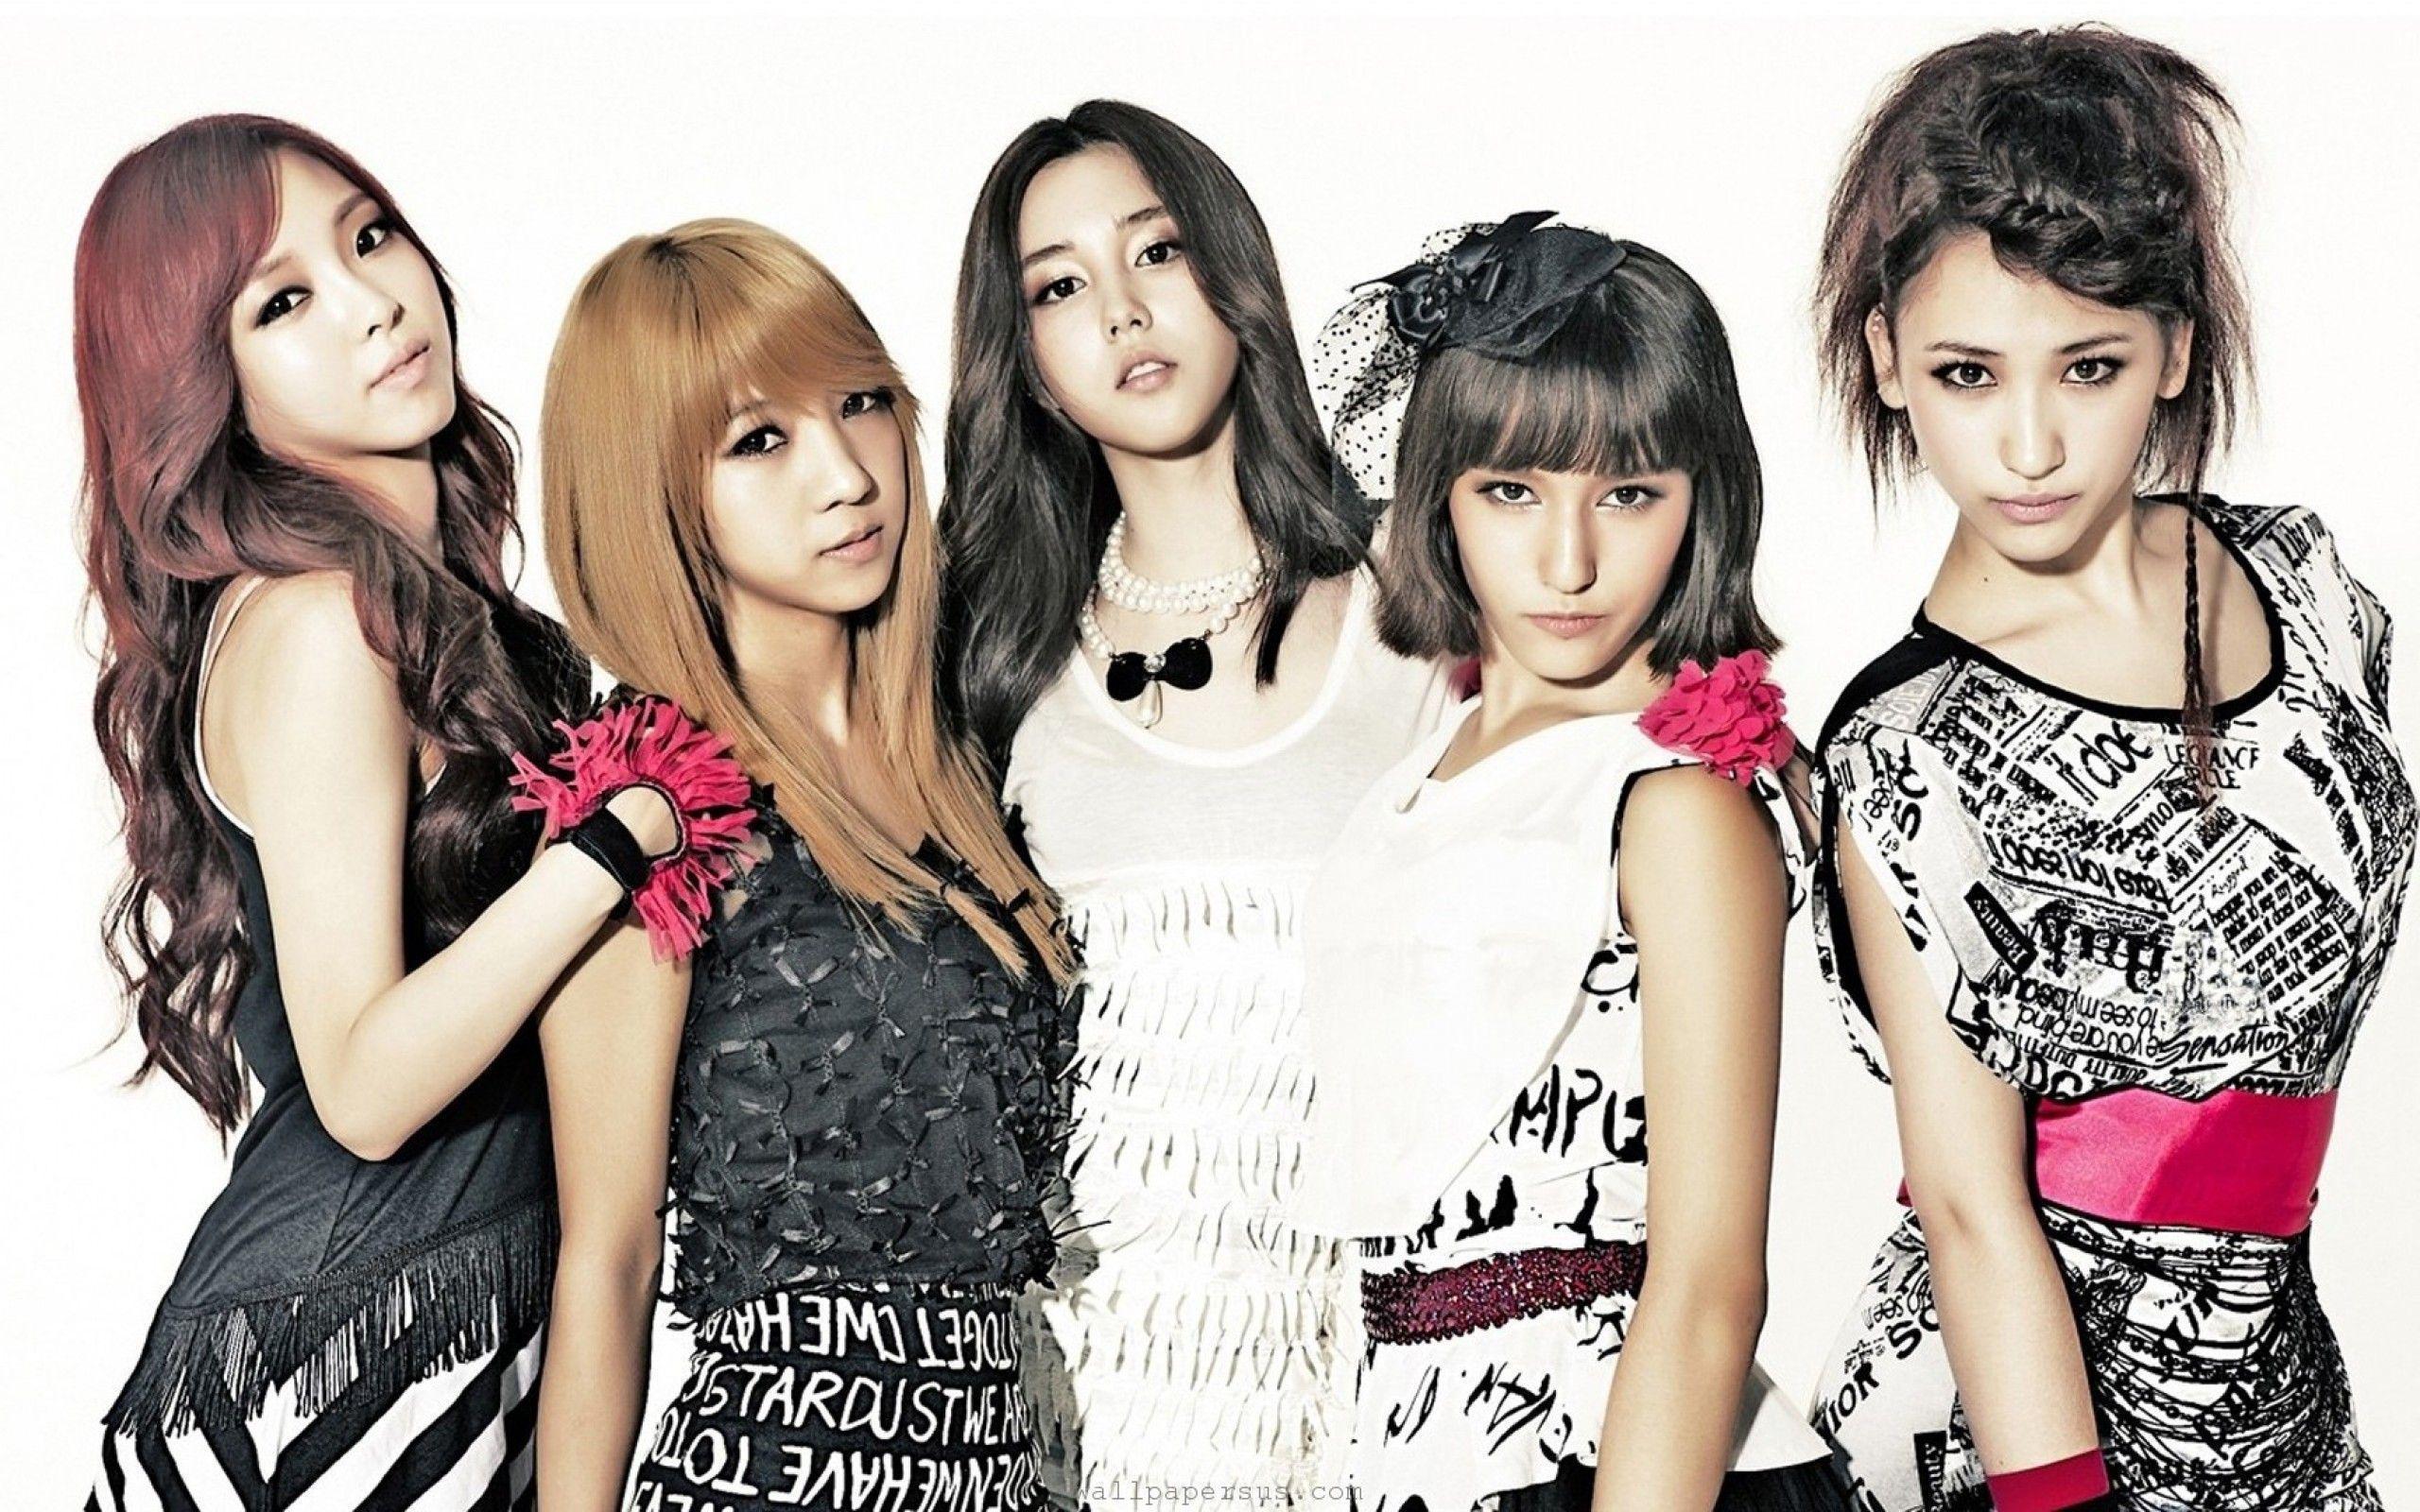 Wallpaper Ace Of Angels Aoa For 1920x1080 #ace of angels